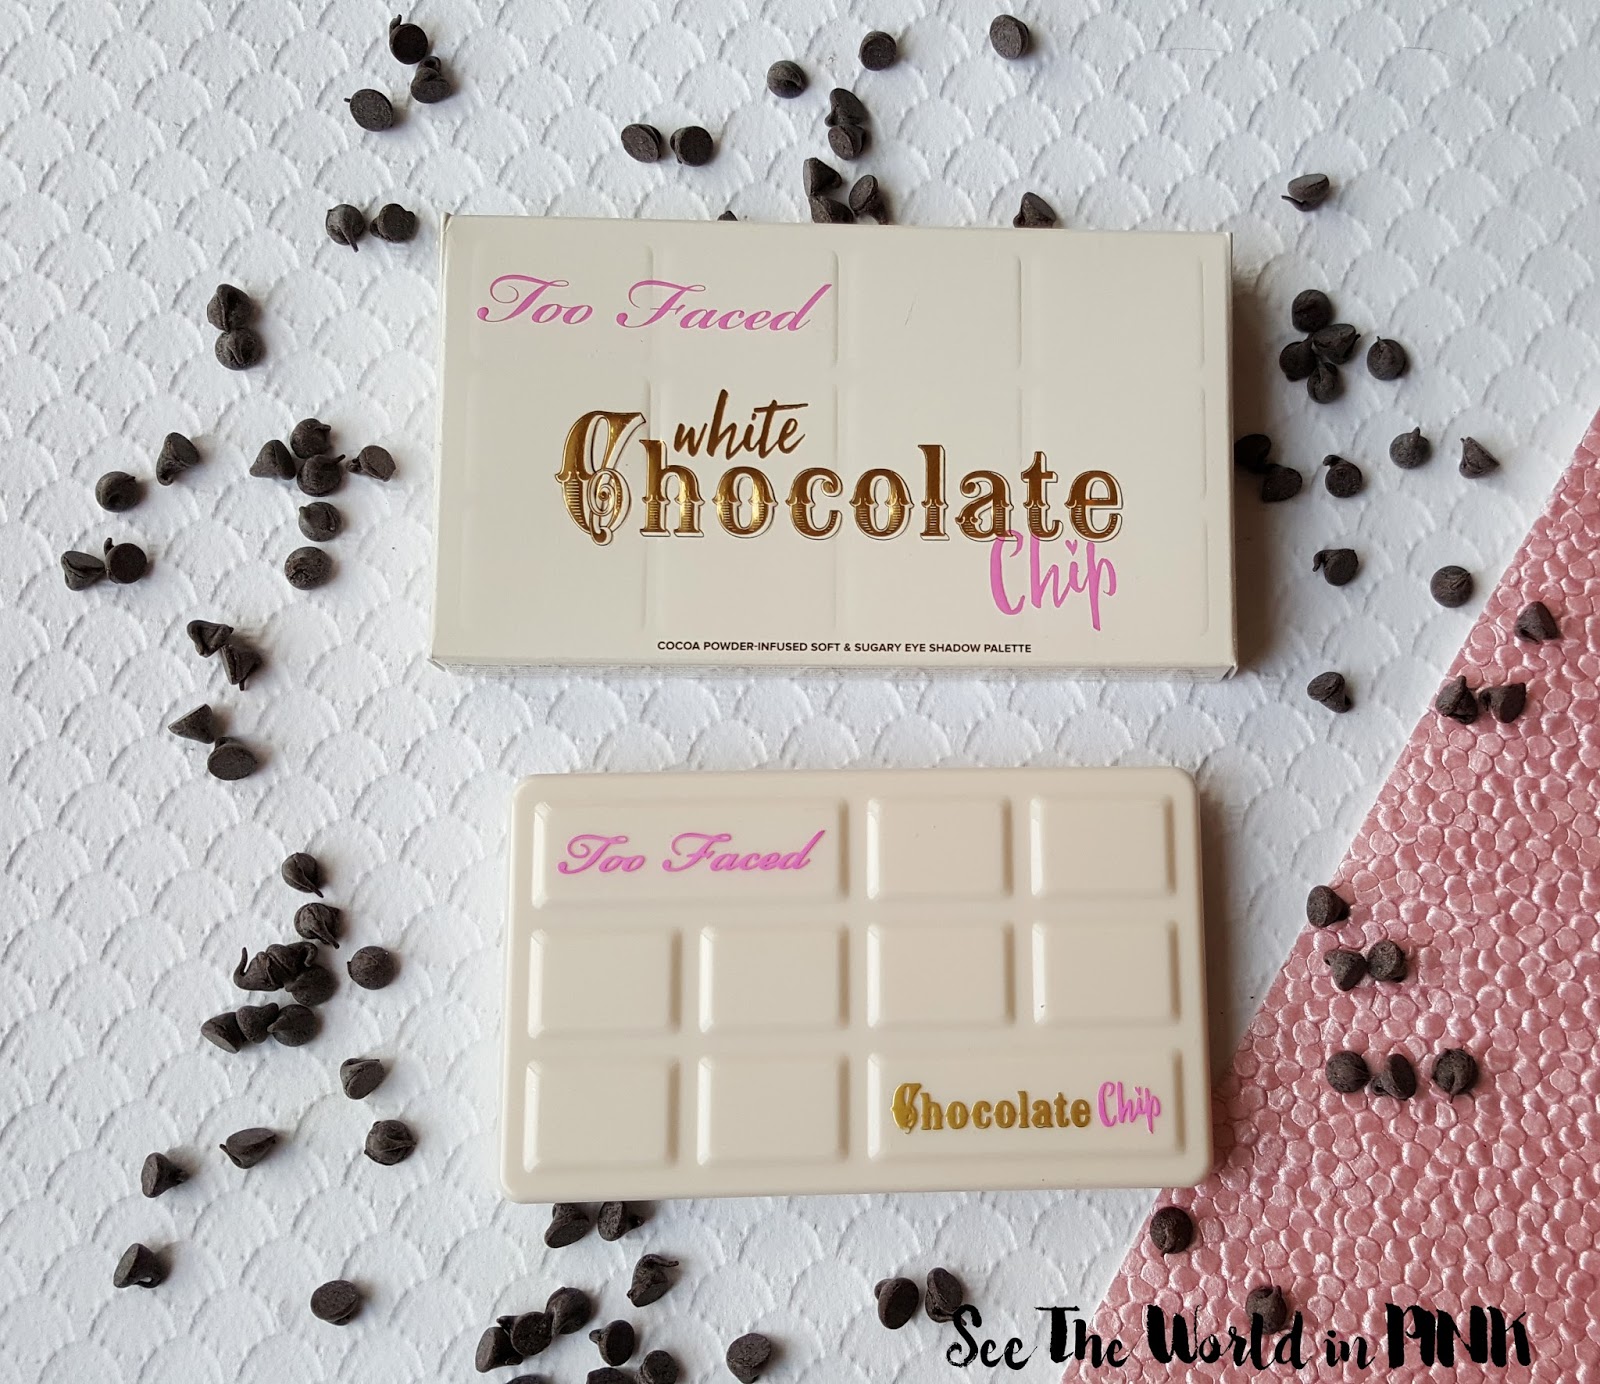 Too Faced White Chocolate Chip Palette - Swatches and Review 